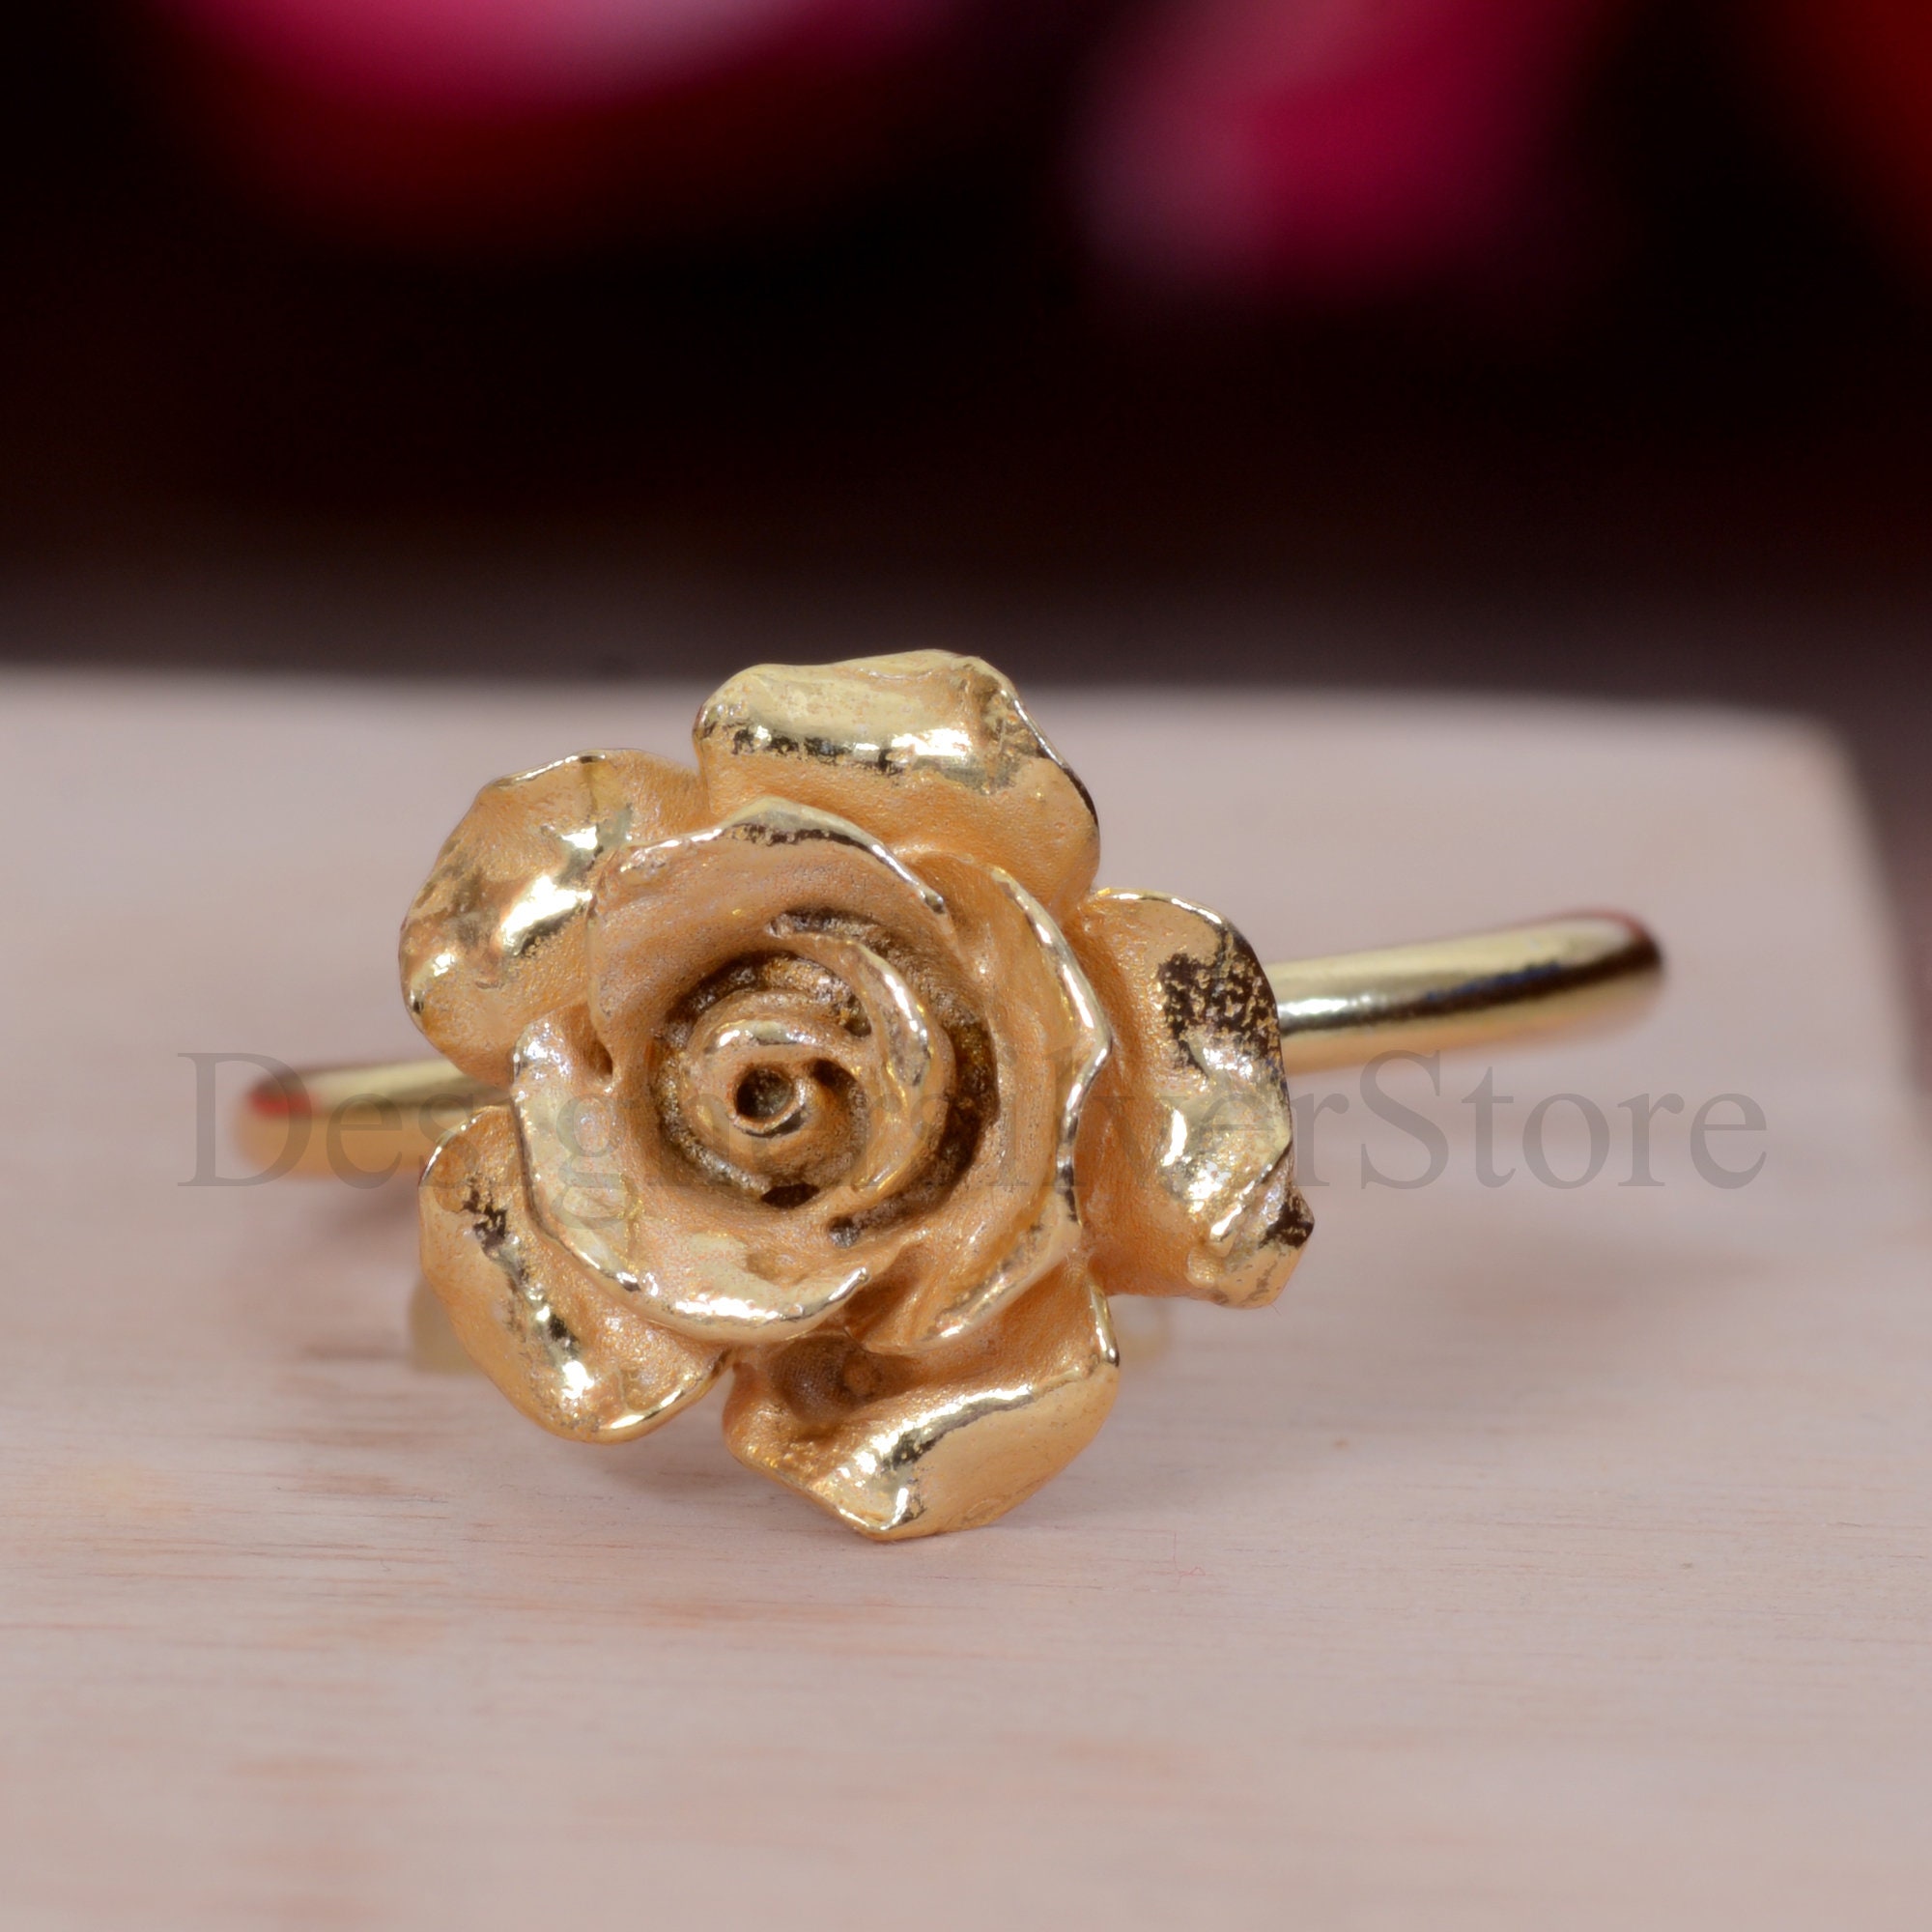 Automic Gold Rose Ring | Minimal Sustainable Fine Jewelry